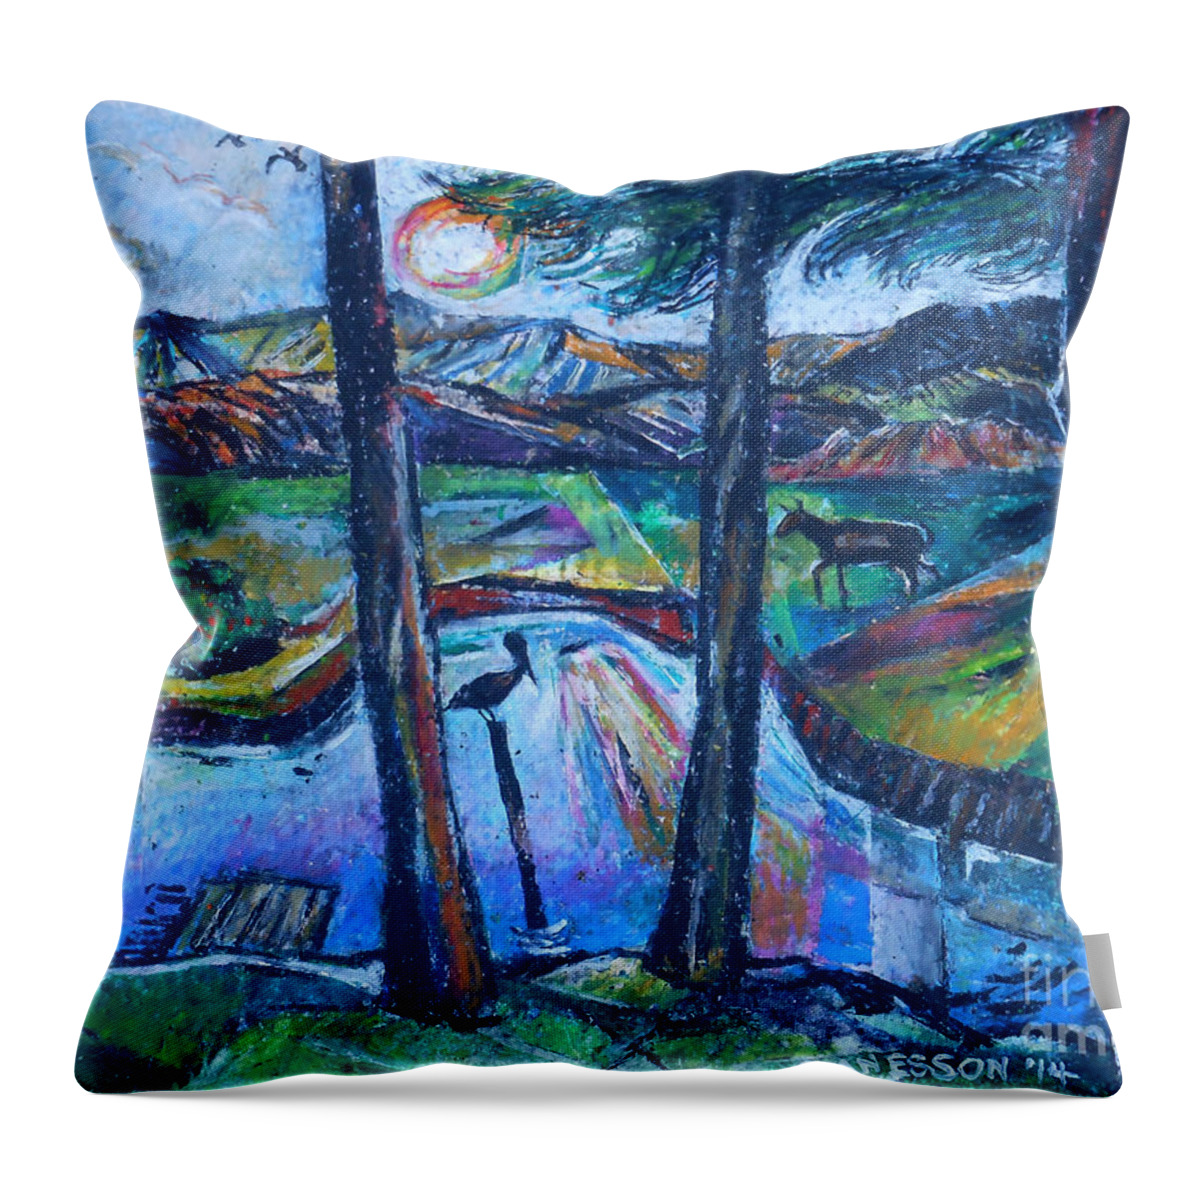 Pelican Throw Pillow featuring the painting Pelican and Moose In Landscape by Stan Esson